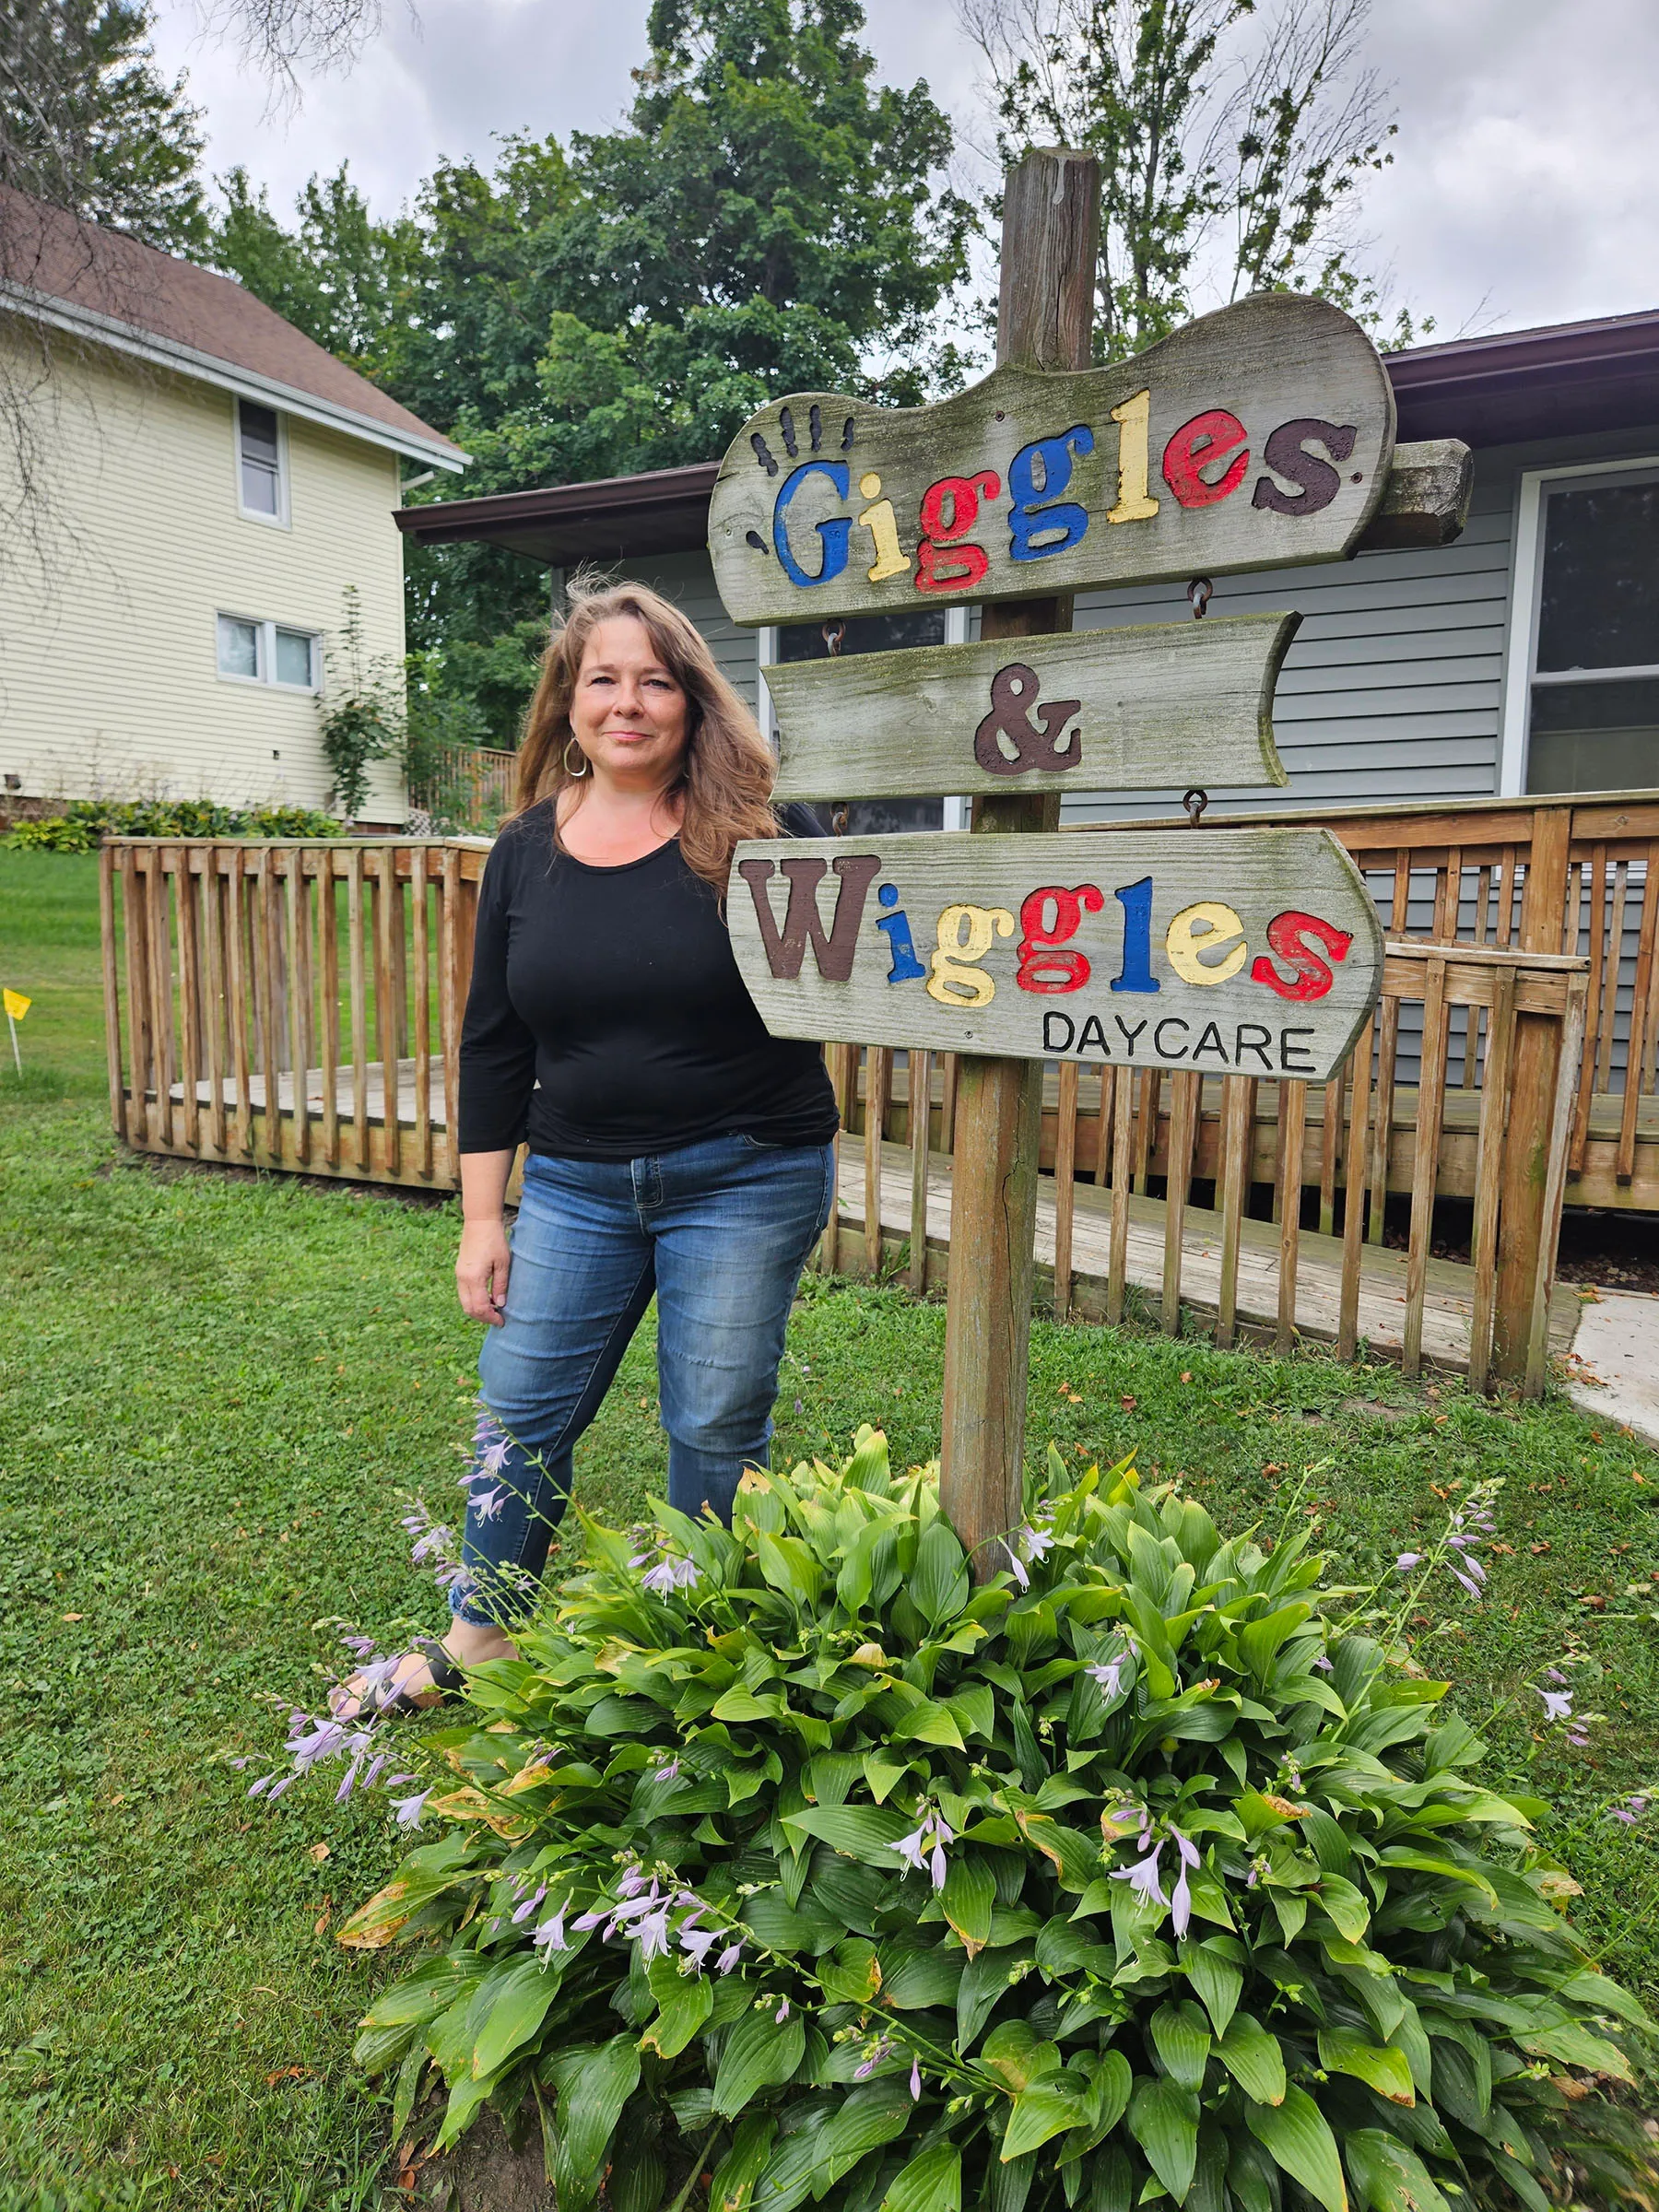 Kristin Holman-Steffel poses next to the "giggles and wiggles daycare" sign.